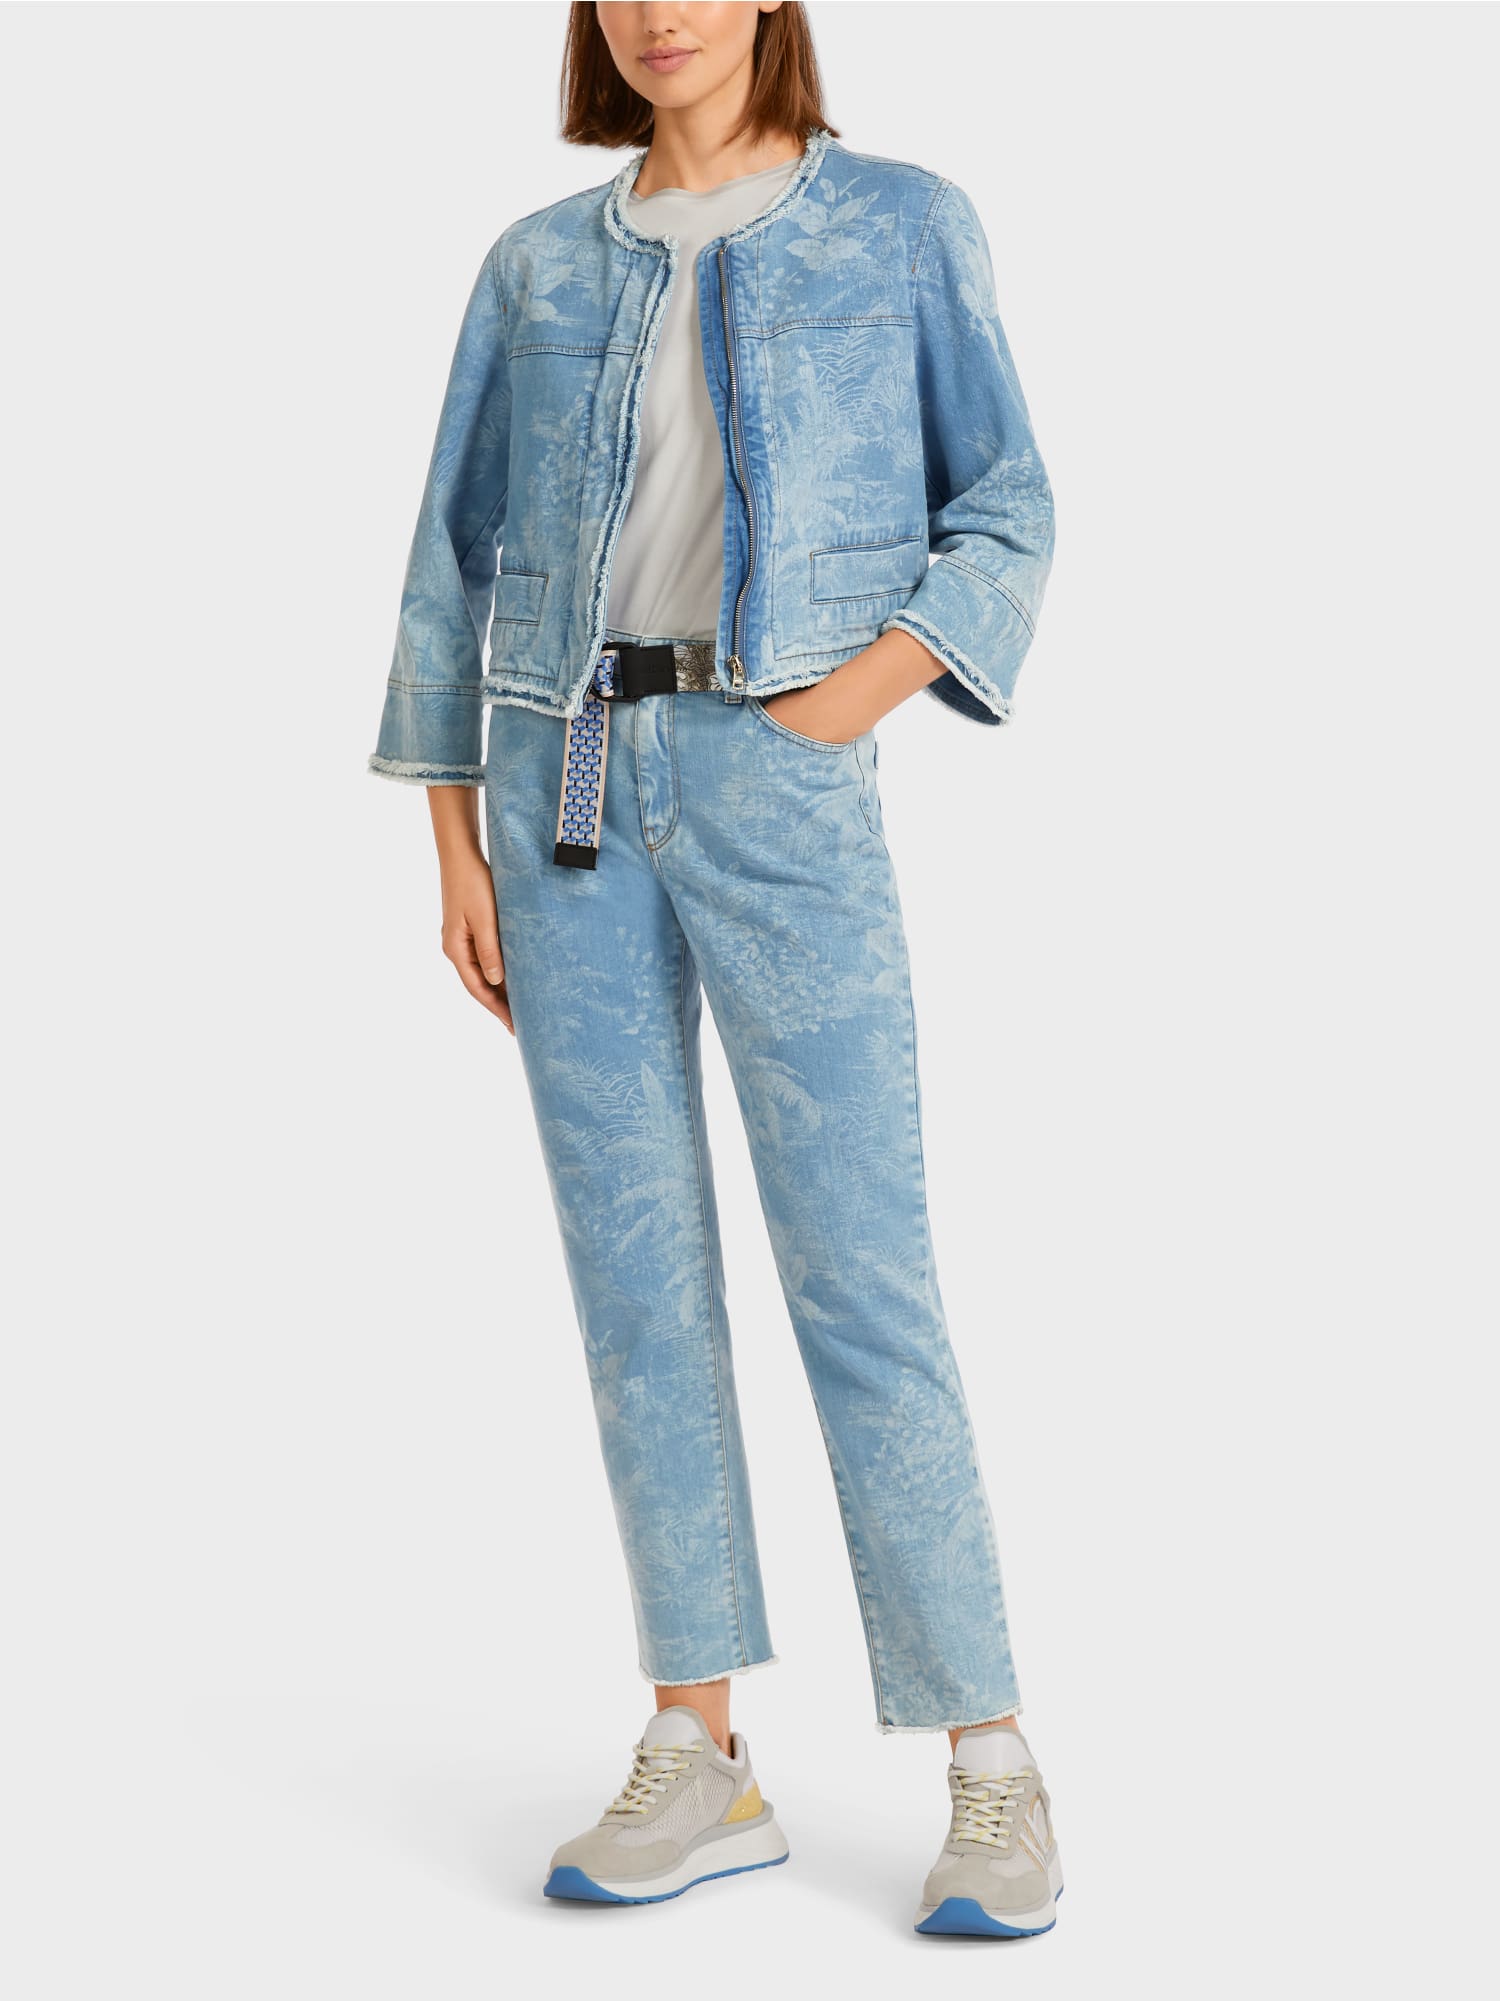 Marc Cain Collections denim jacket